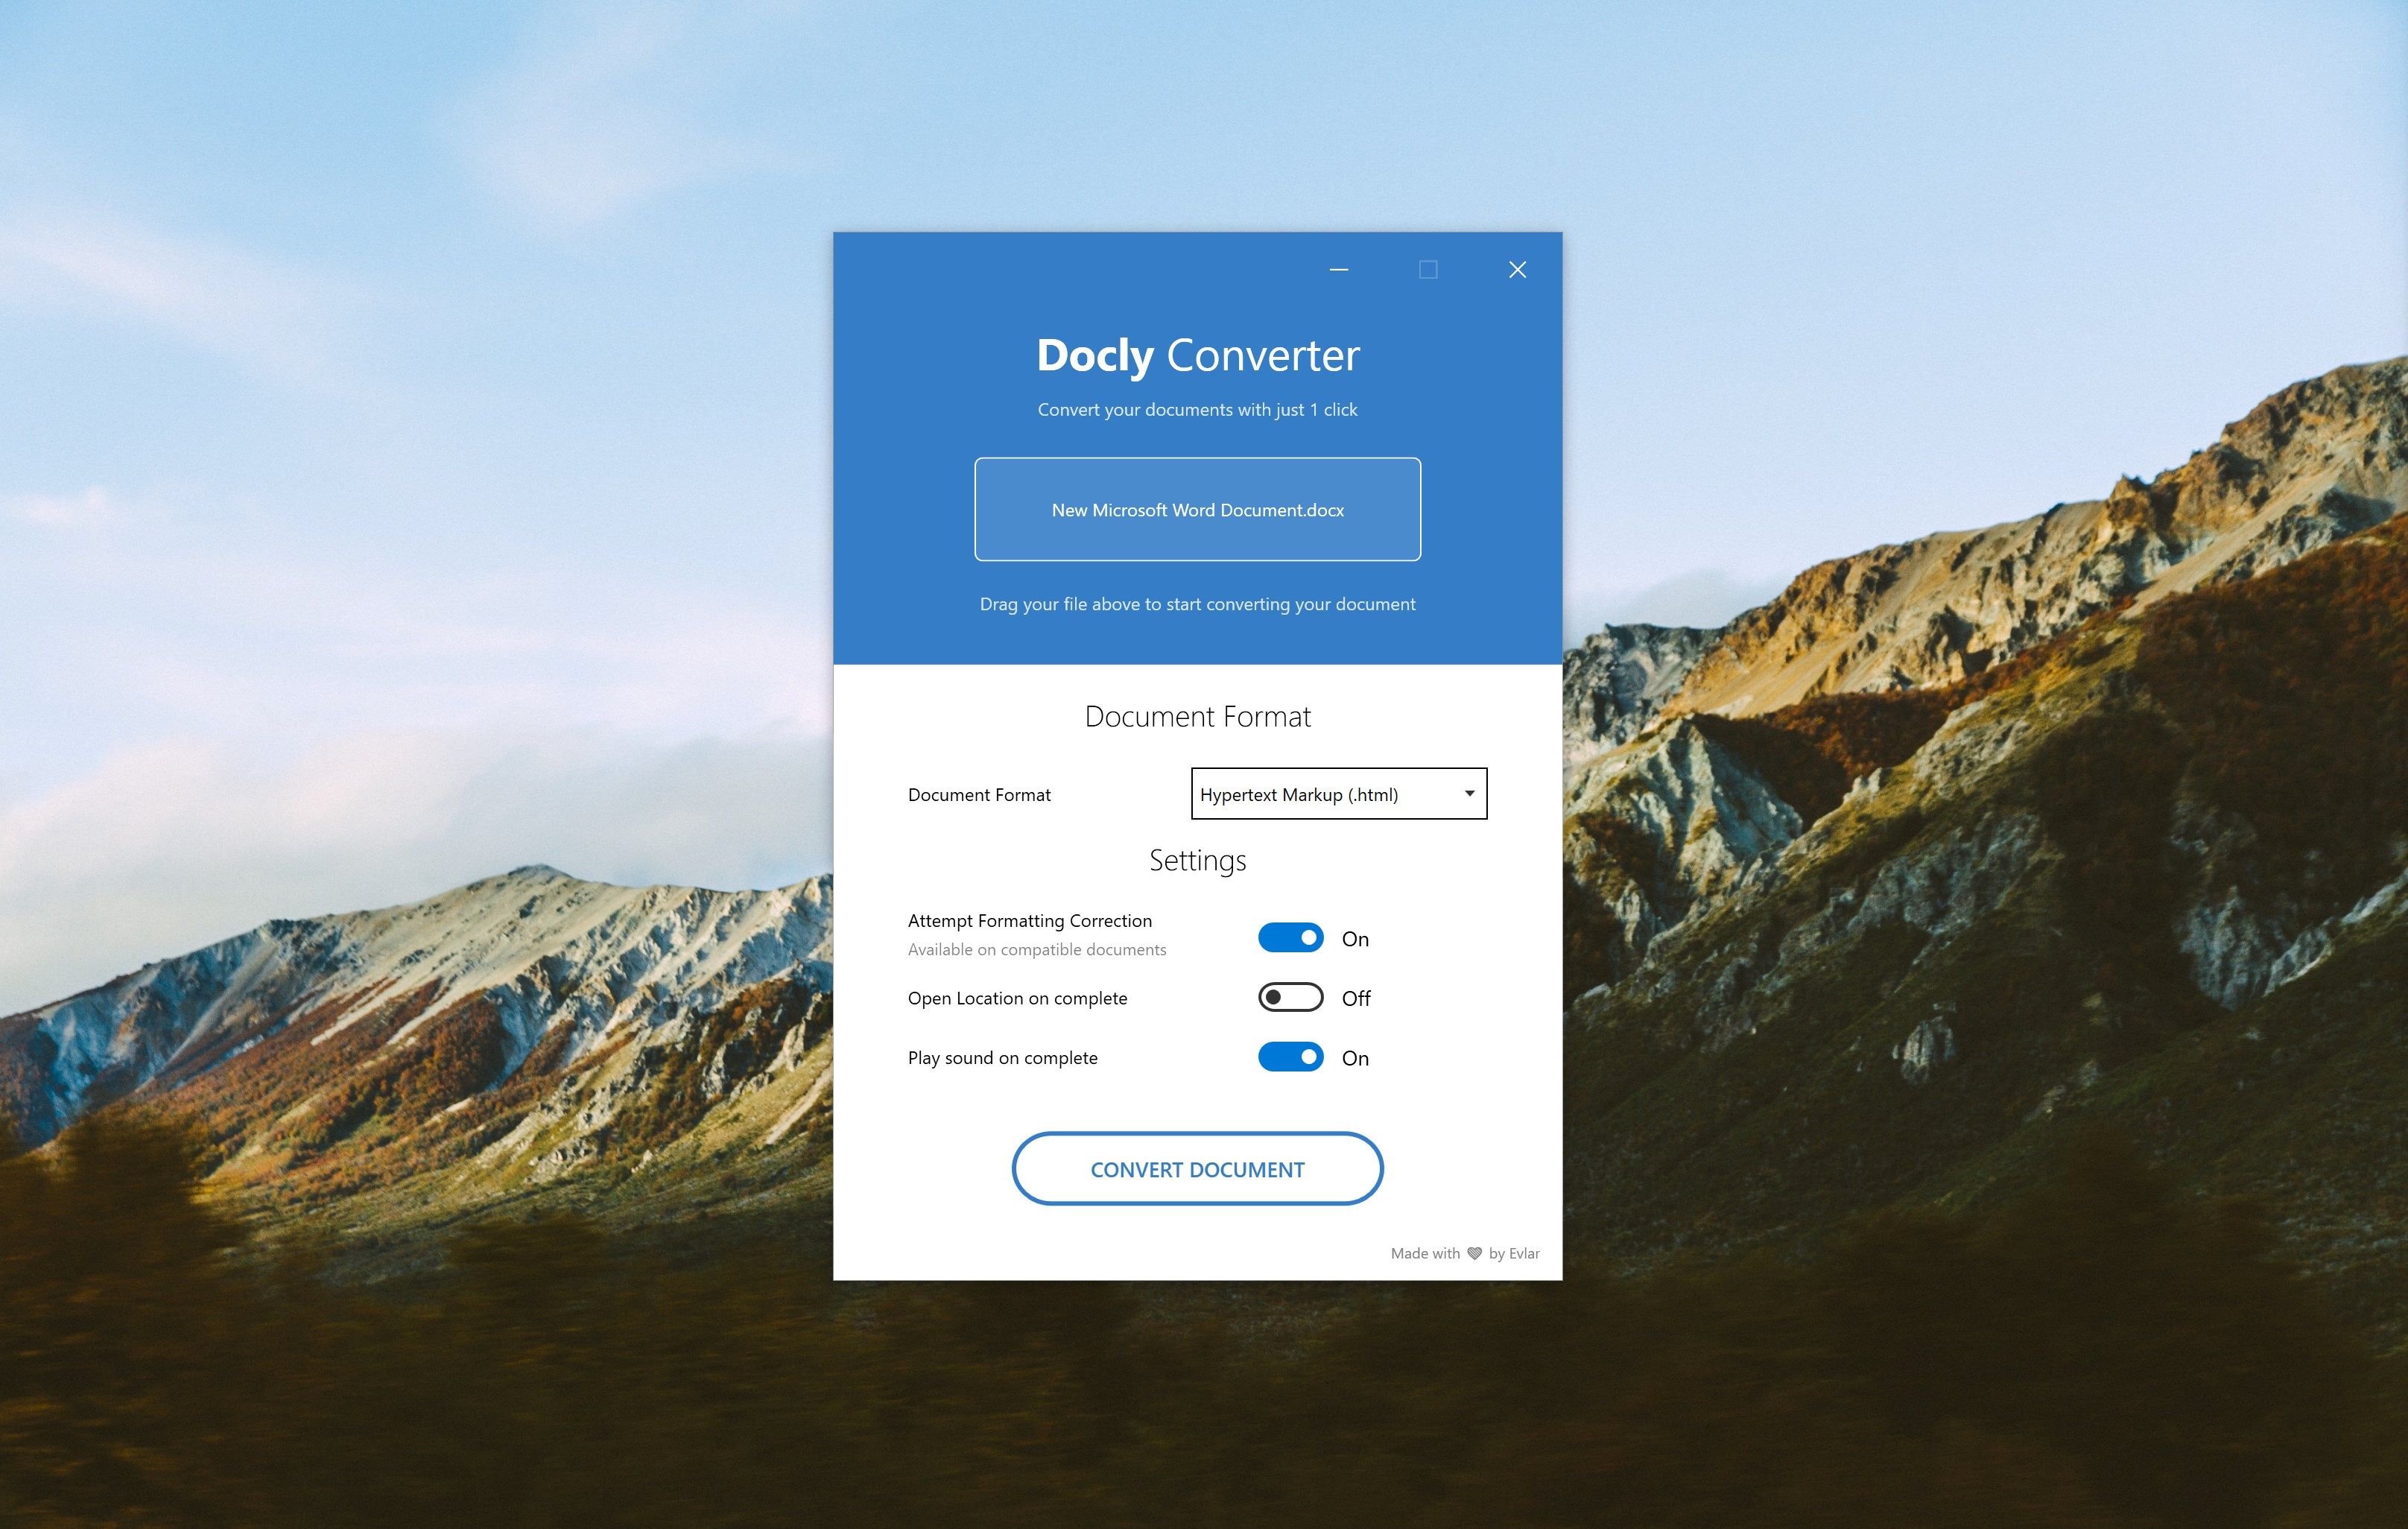 Docly - 1 Click Document Converter